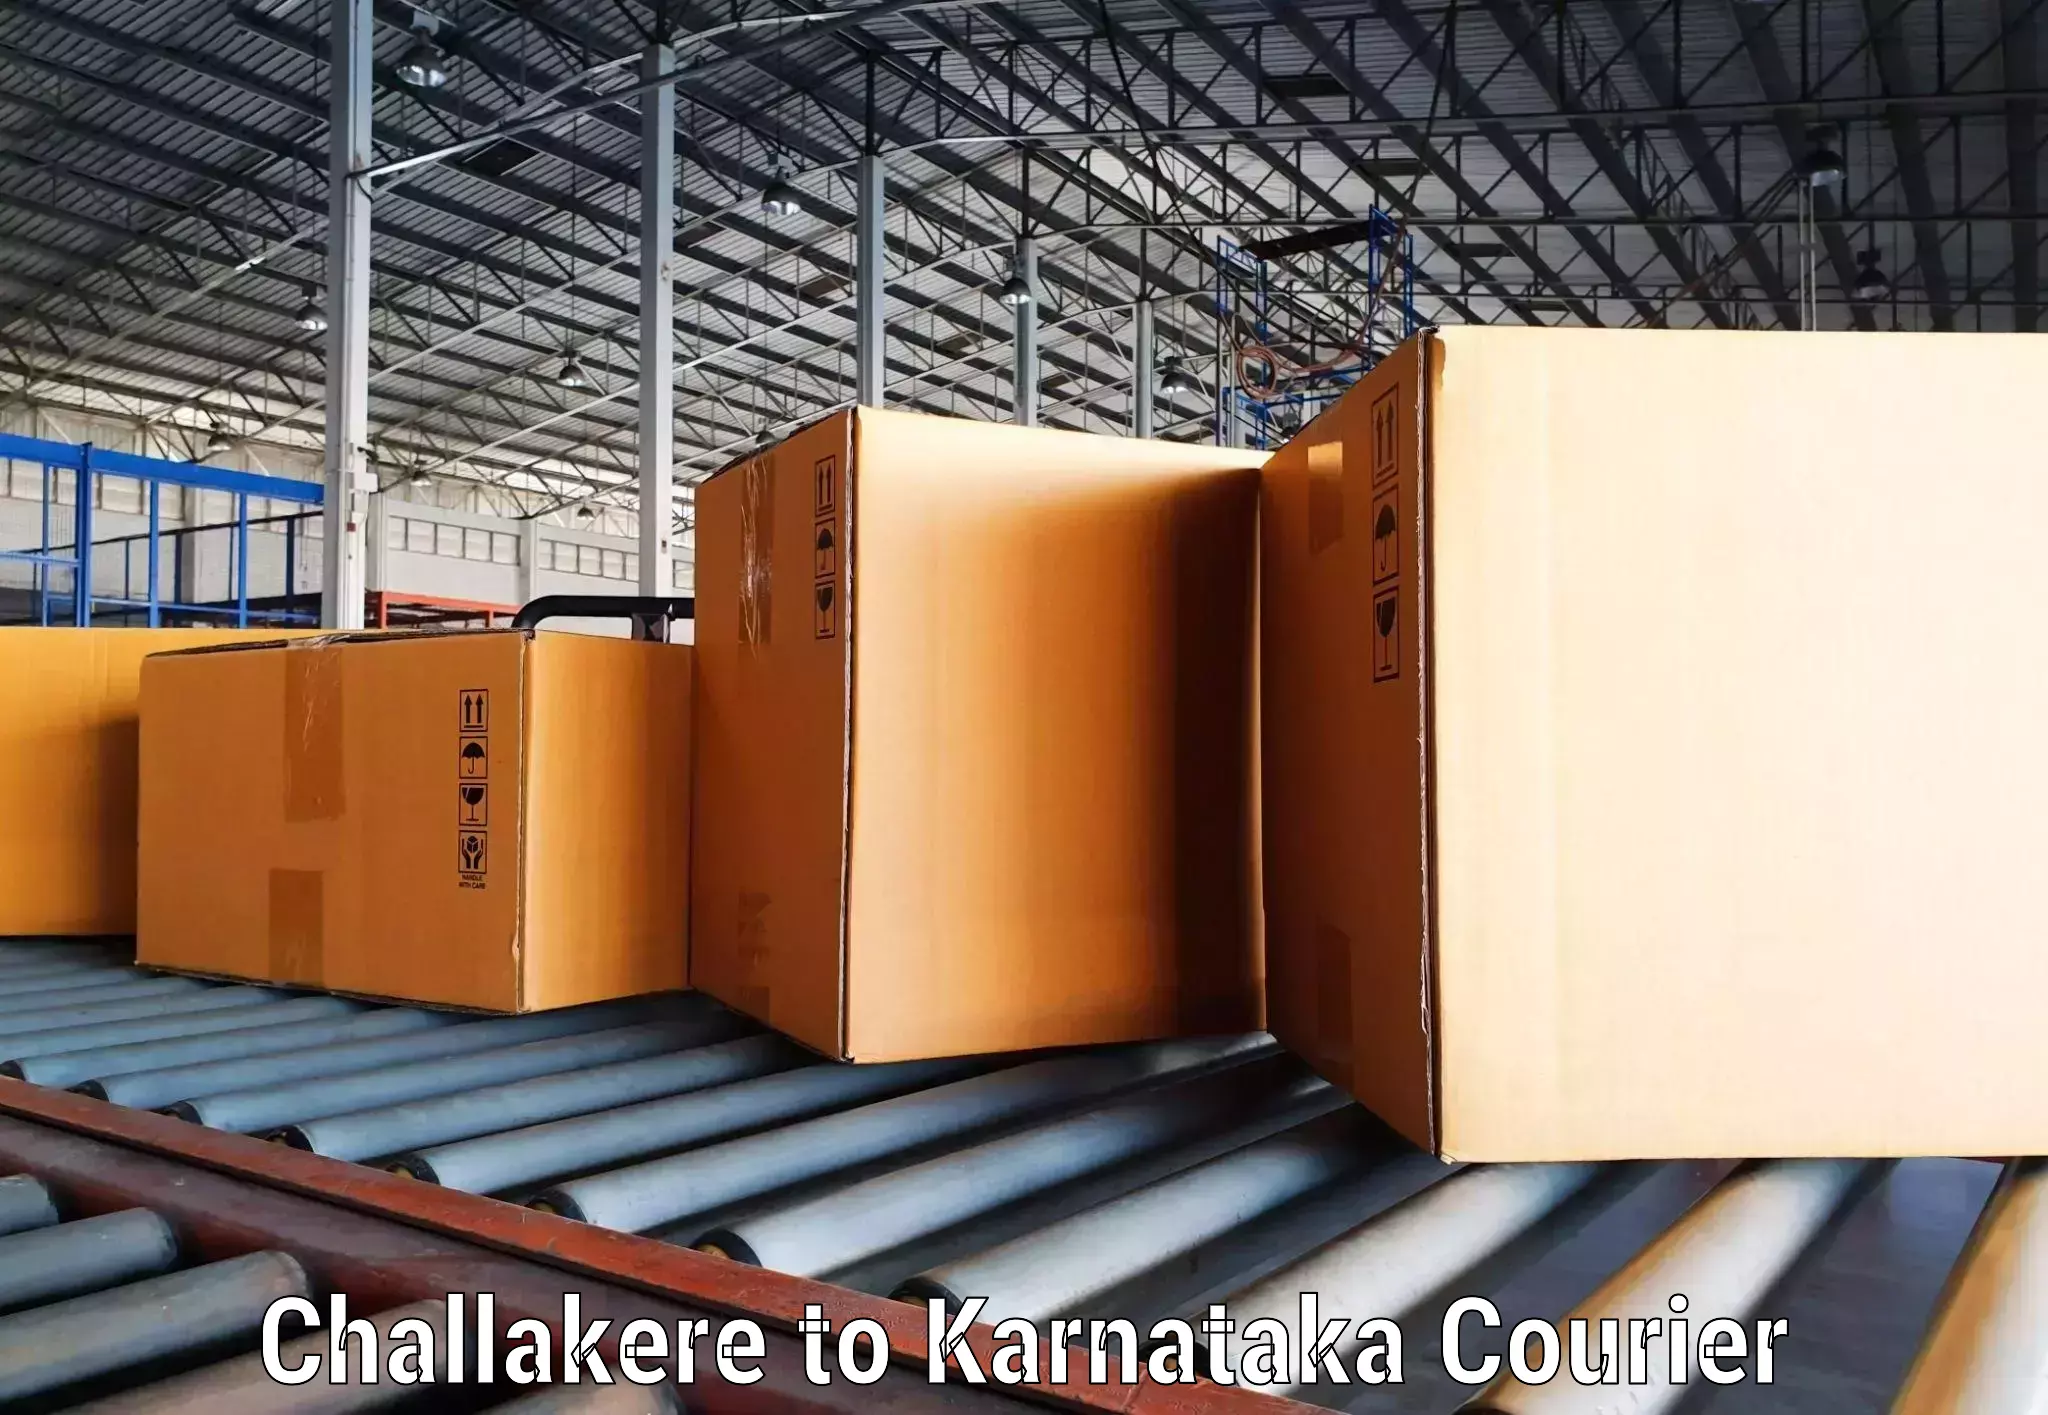 Modern courier technology Challakere to Gurmatkal